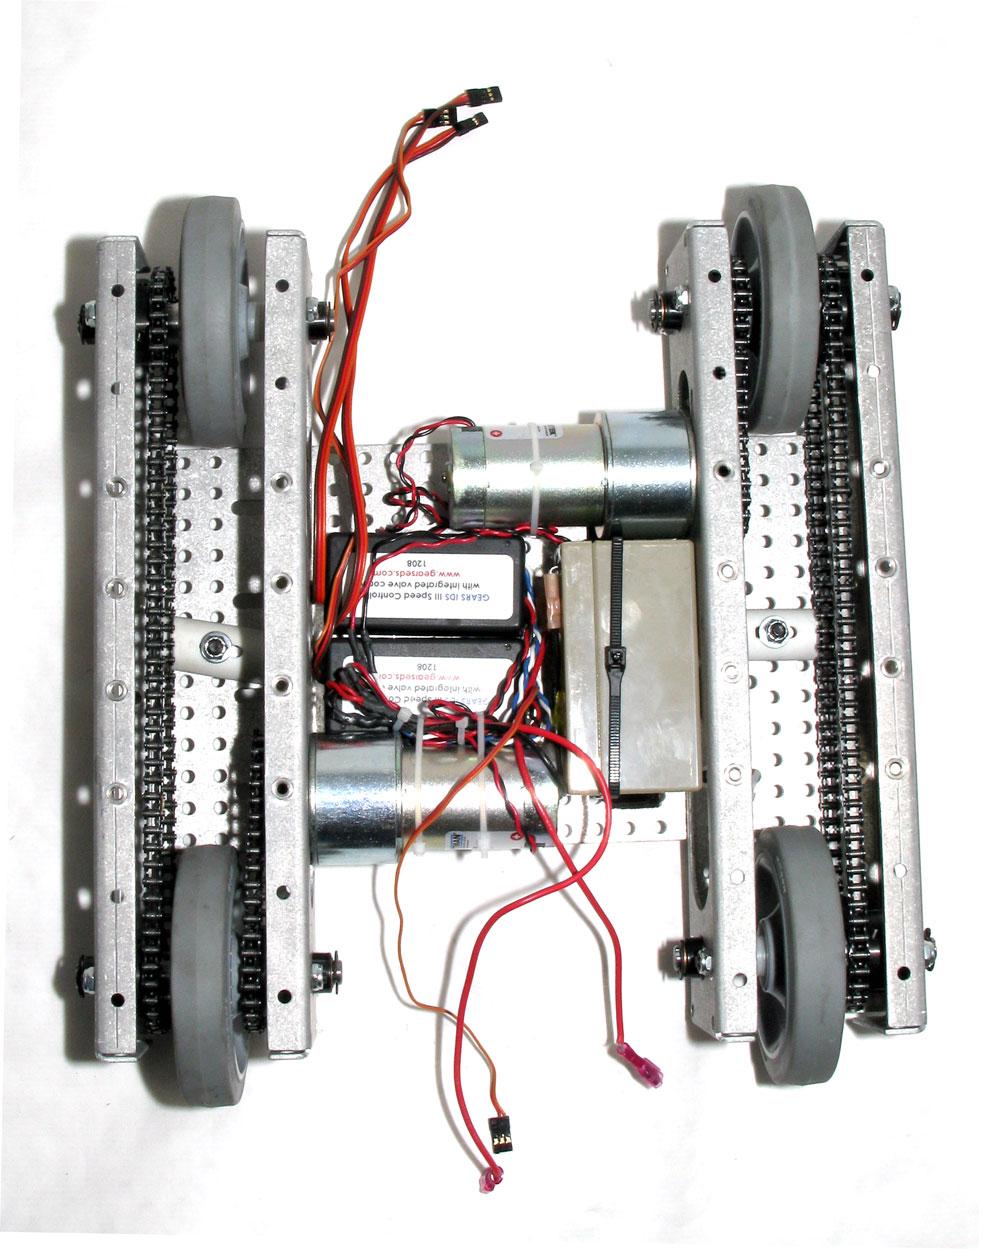 Integrating the HMC Chassis with the Pneumatic Module This section is provided for students and teachers who use both the GEARS- Pneumatic Module and the HMC Chassis in their engineering program